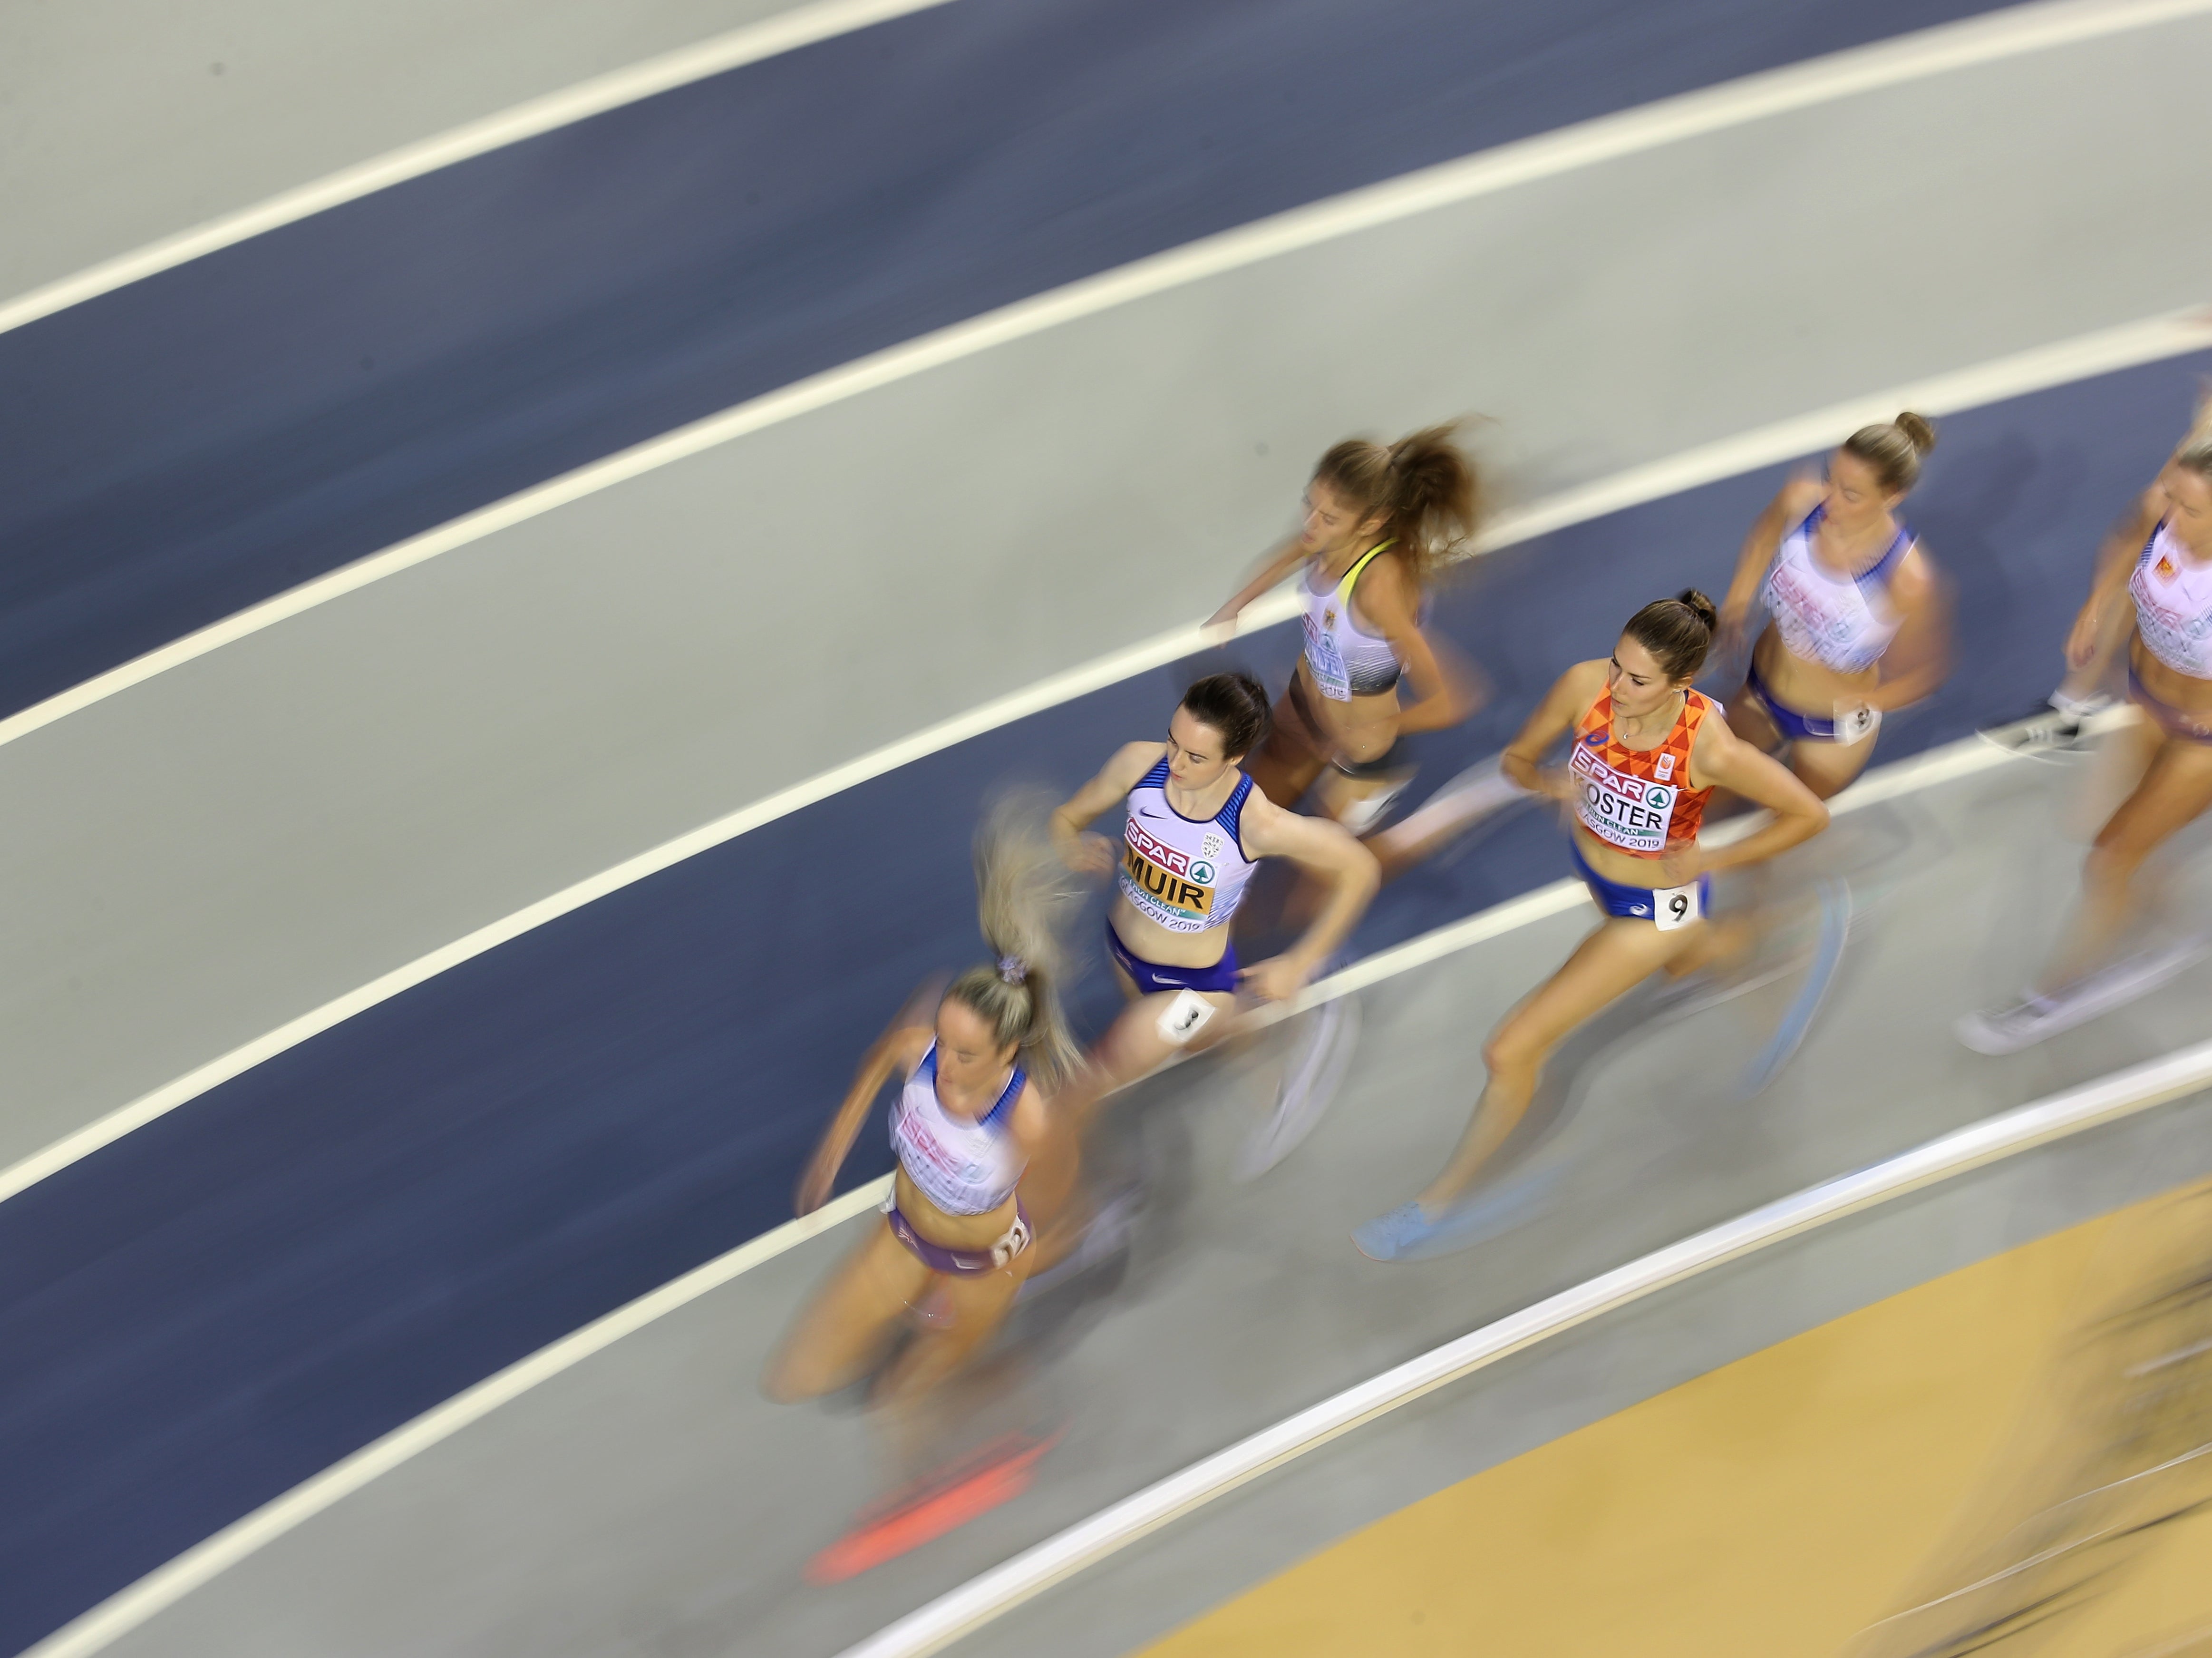 The 2023 European Indoors will be held in Turkey